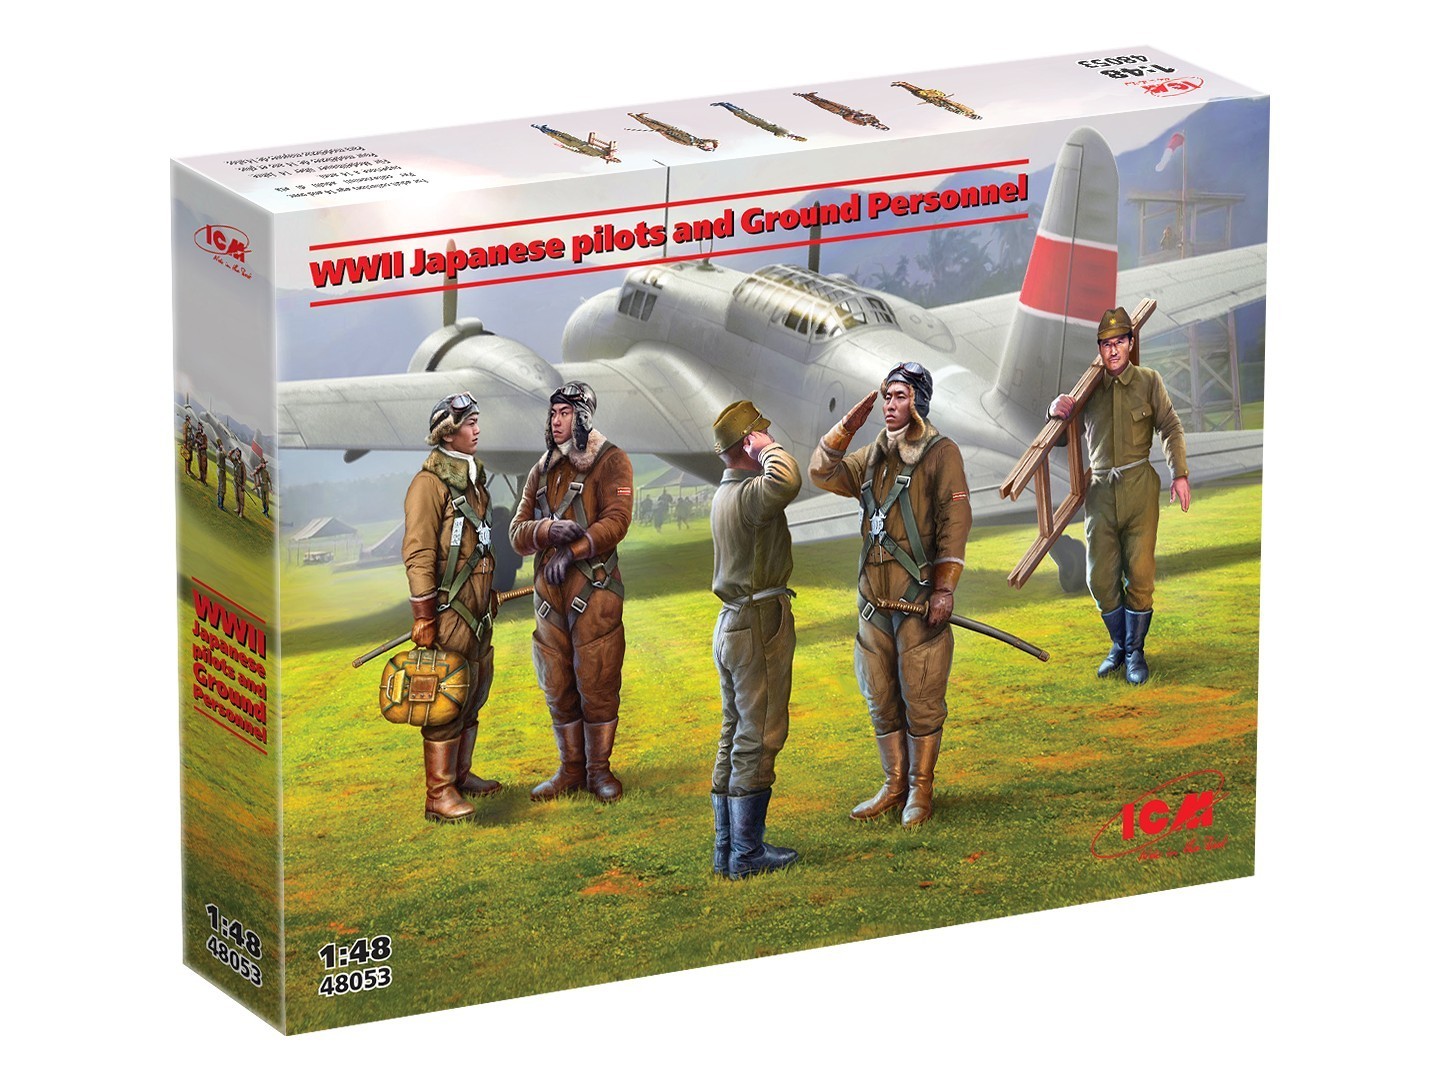 48053 - Japanese pilots and Ground Personnel WWII 1:48